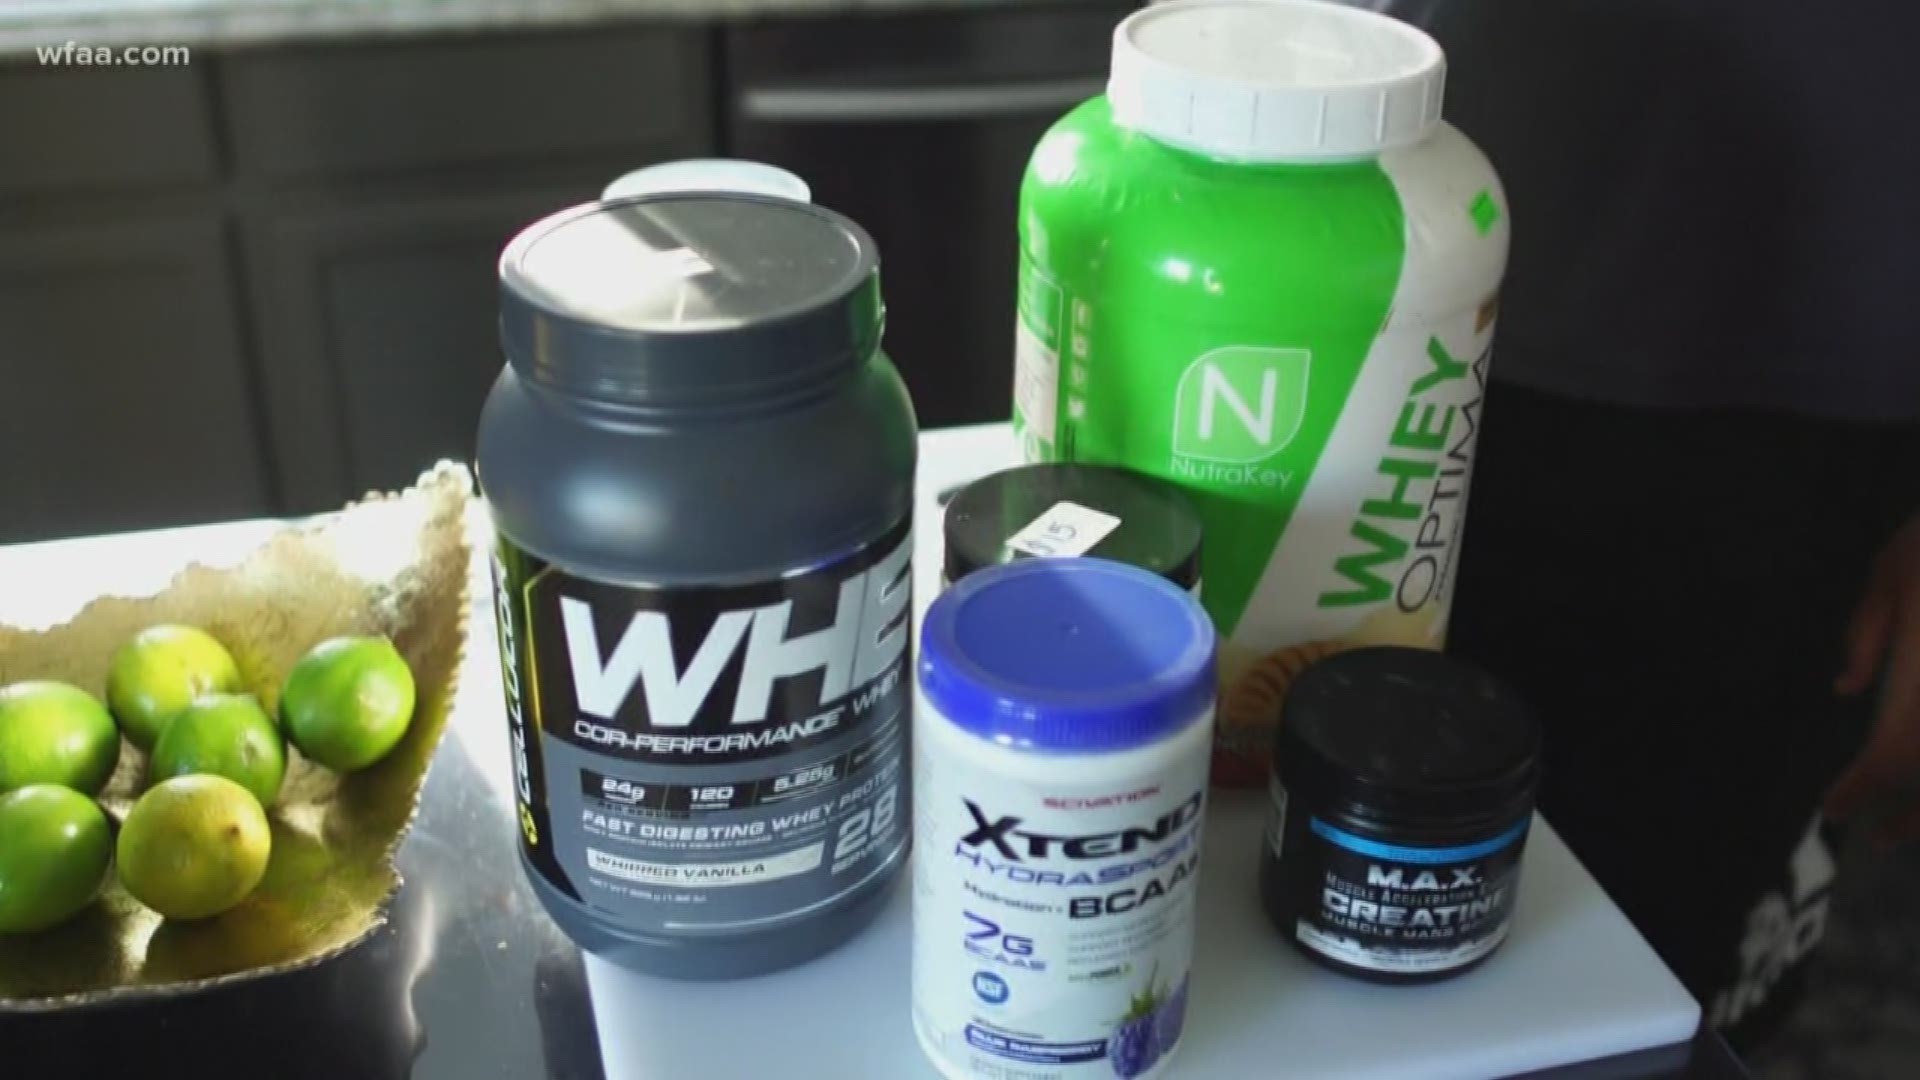 Health and fitness supplements are a billion-dollar industry that goes largely unregulated.